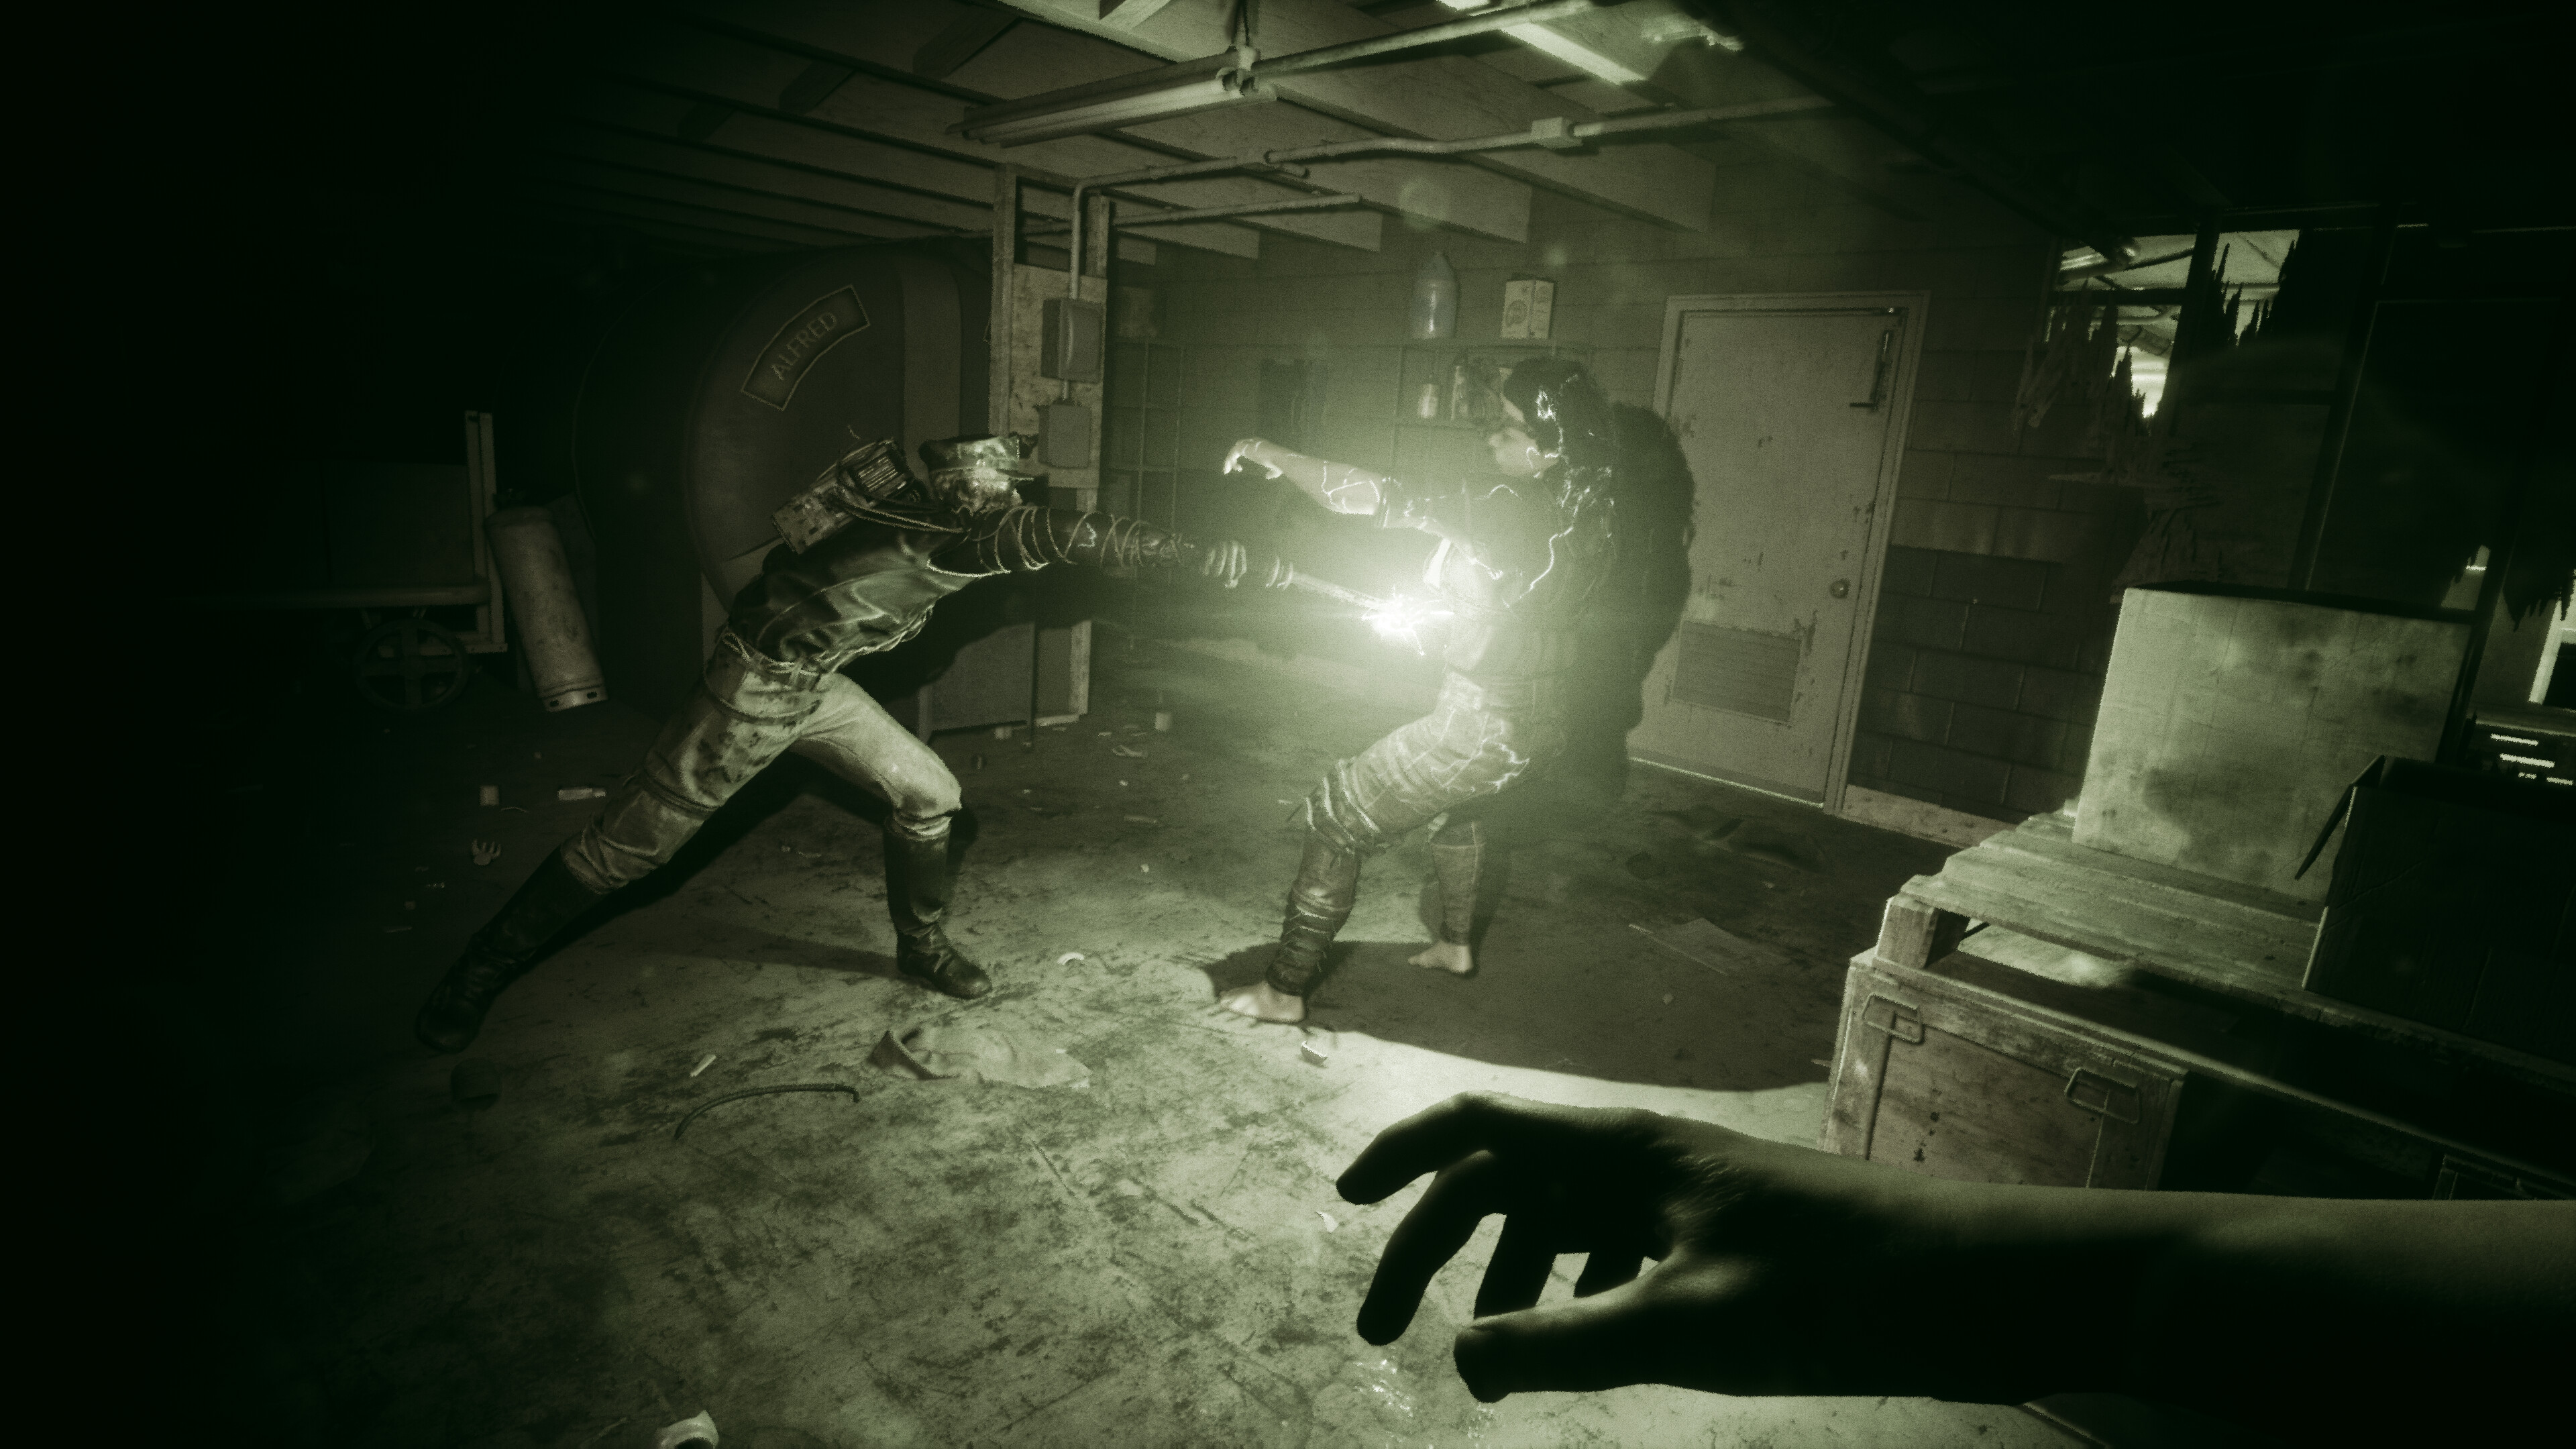 The Outlast Trials: A Bone-chilling Co-op Experience - Early Access Takes  The Gaming World by Storm